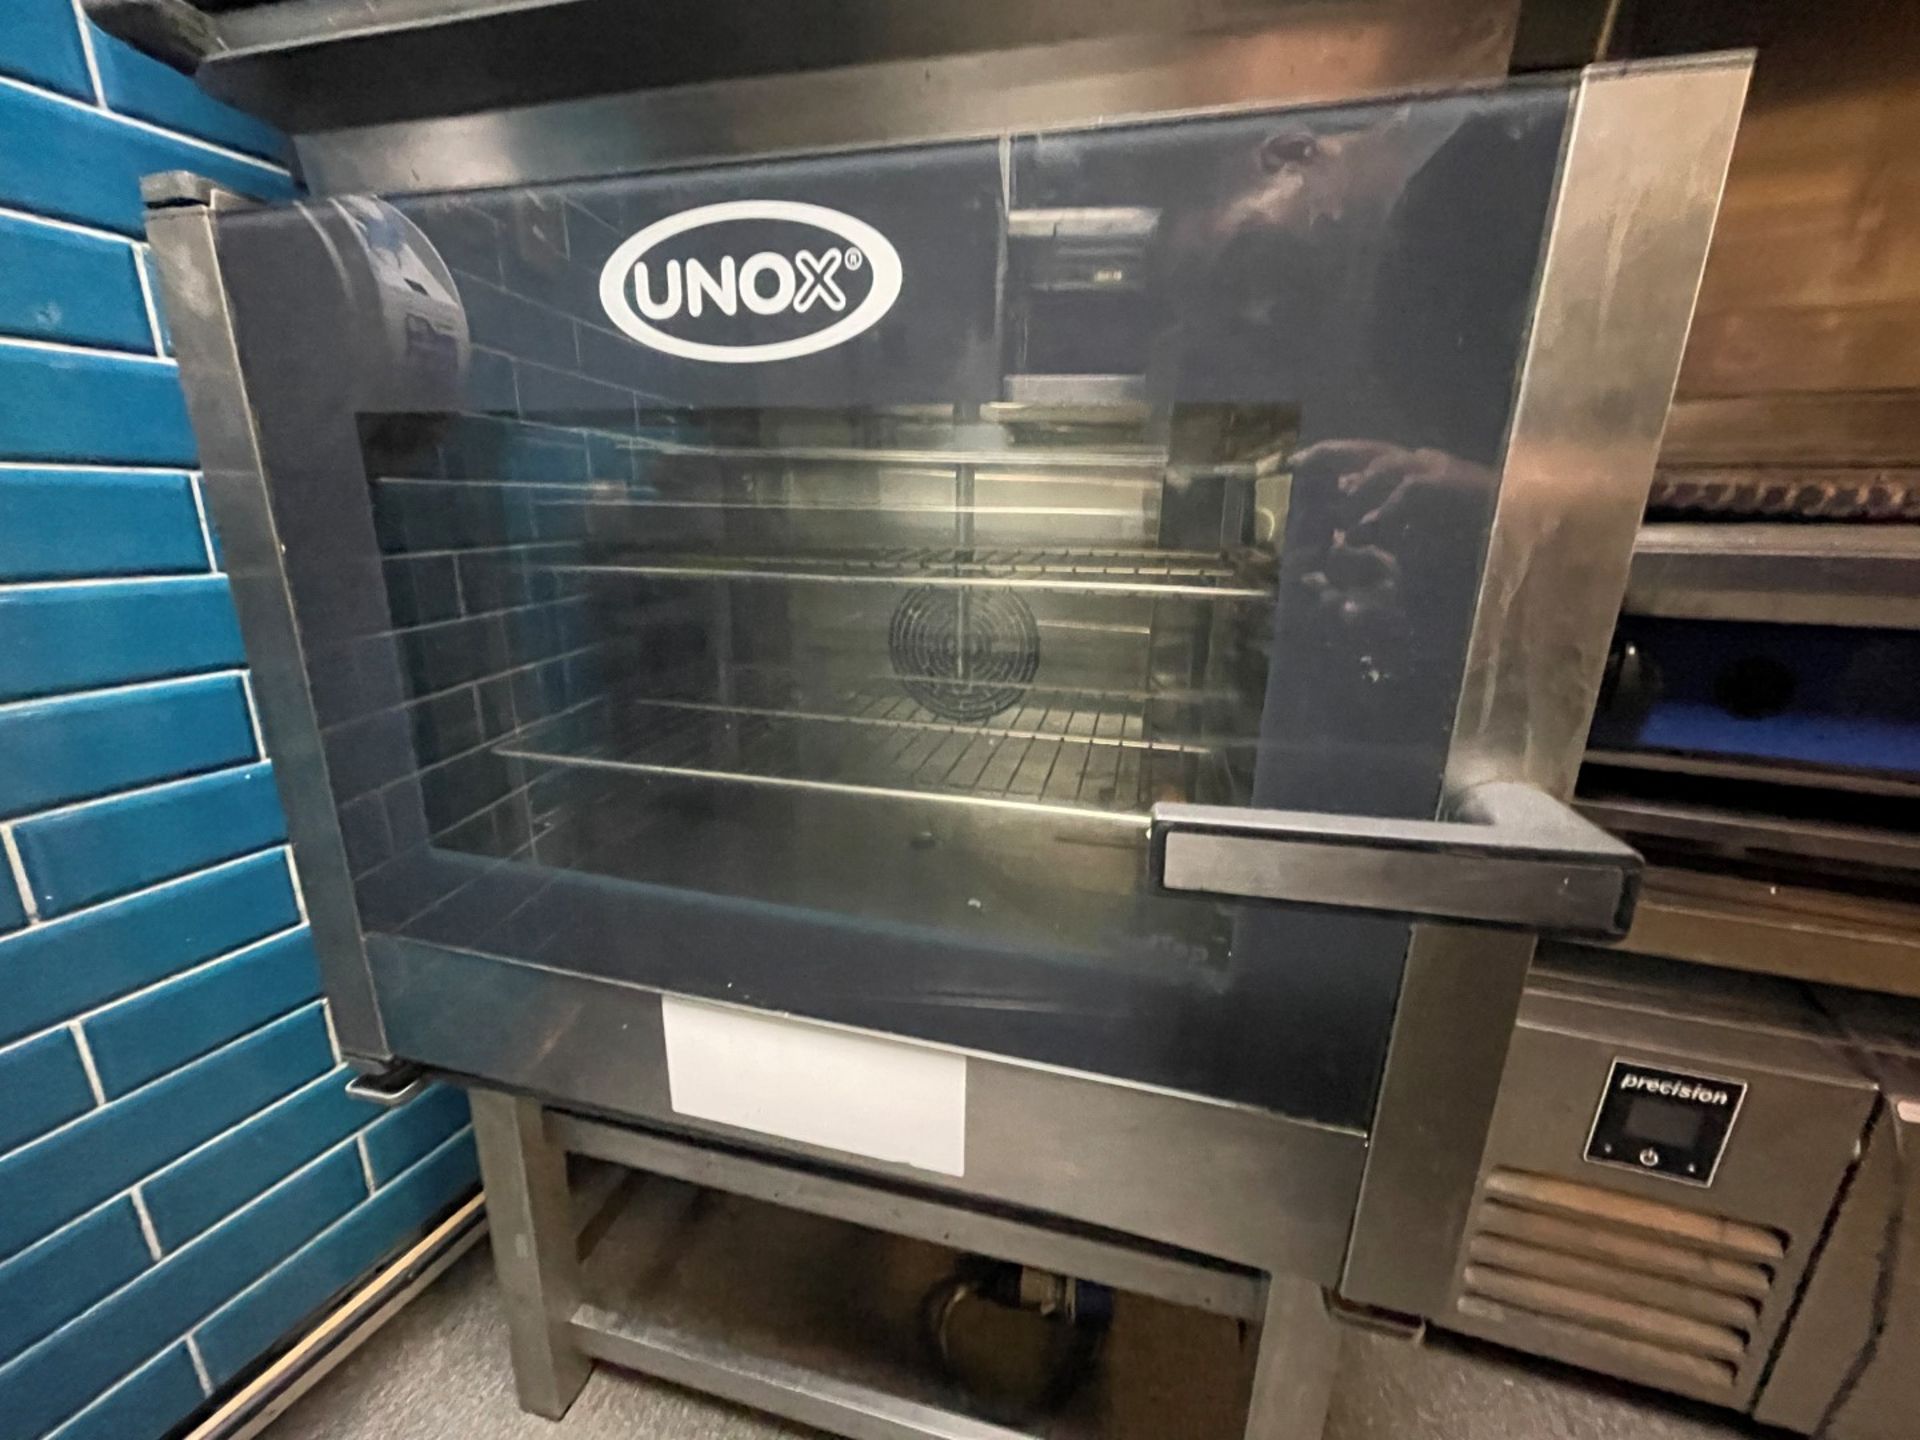 1 x Unox ChefTop XVL385 Commercial 3 Phase Double Oven For Slow Cooking Meats, Proving Dough & More - Image 17 of 26